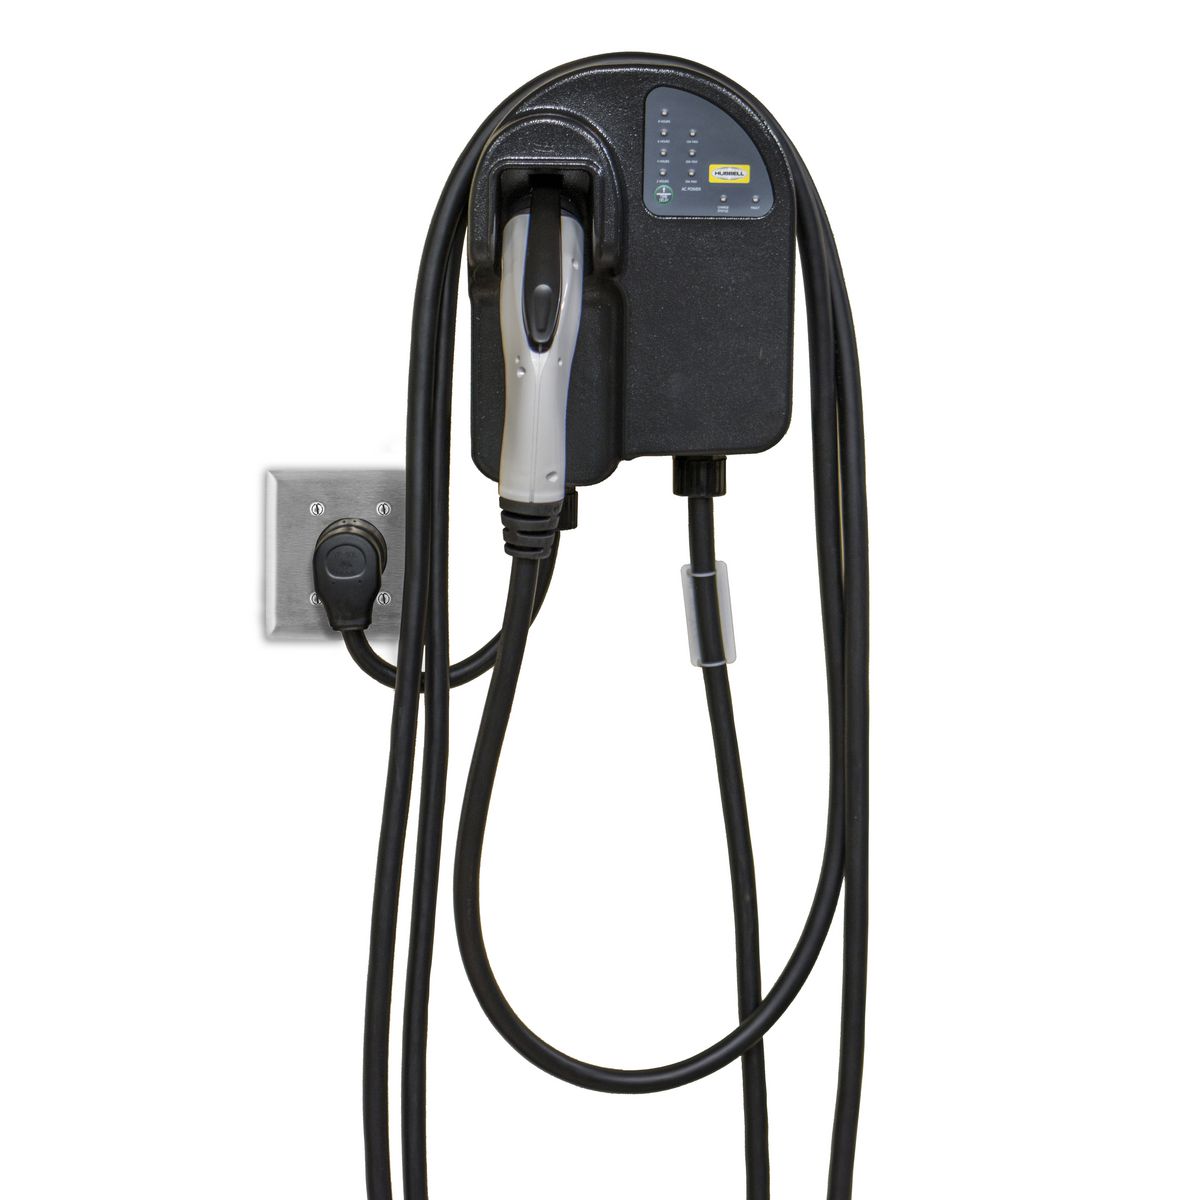 Hubbell Wiring Device Kellems, Electric Vehicle Charger, 30A, 208